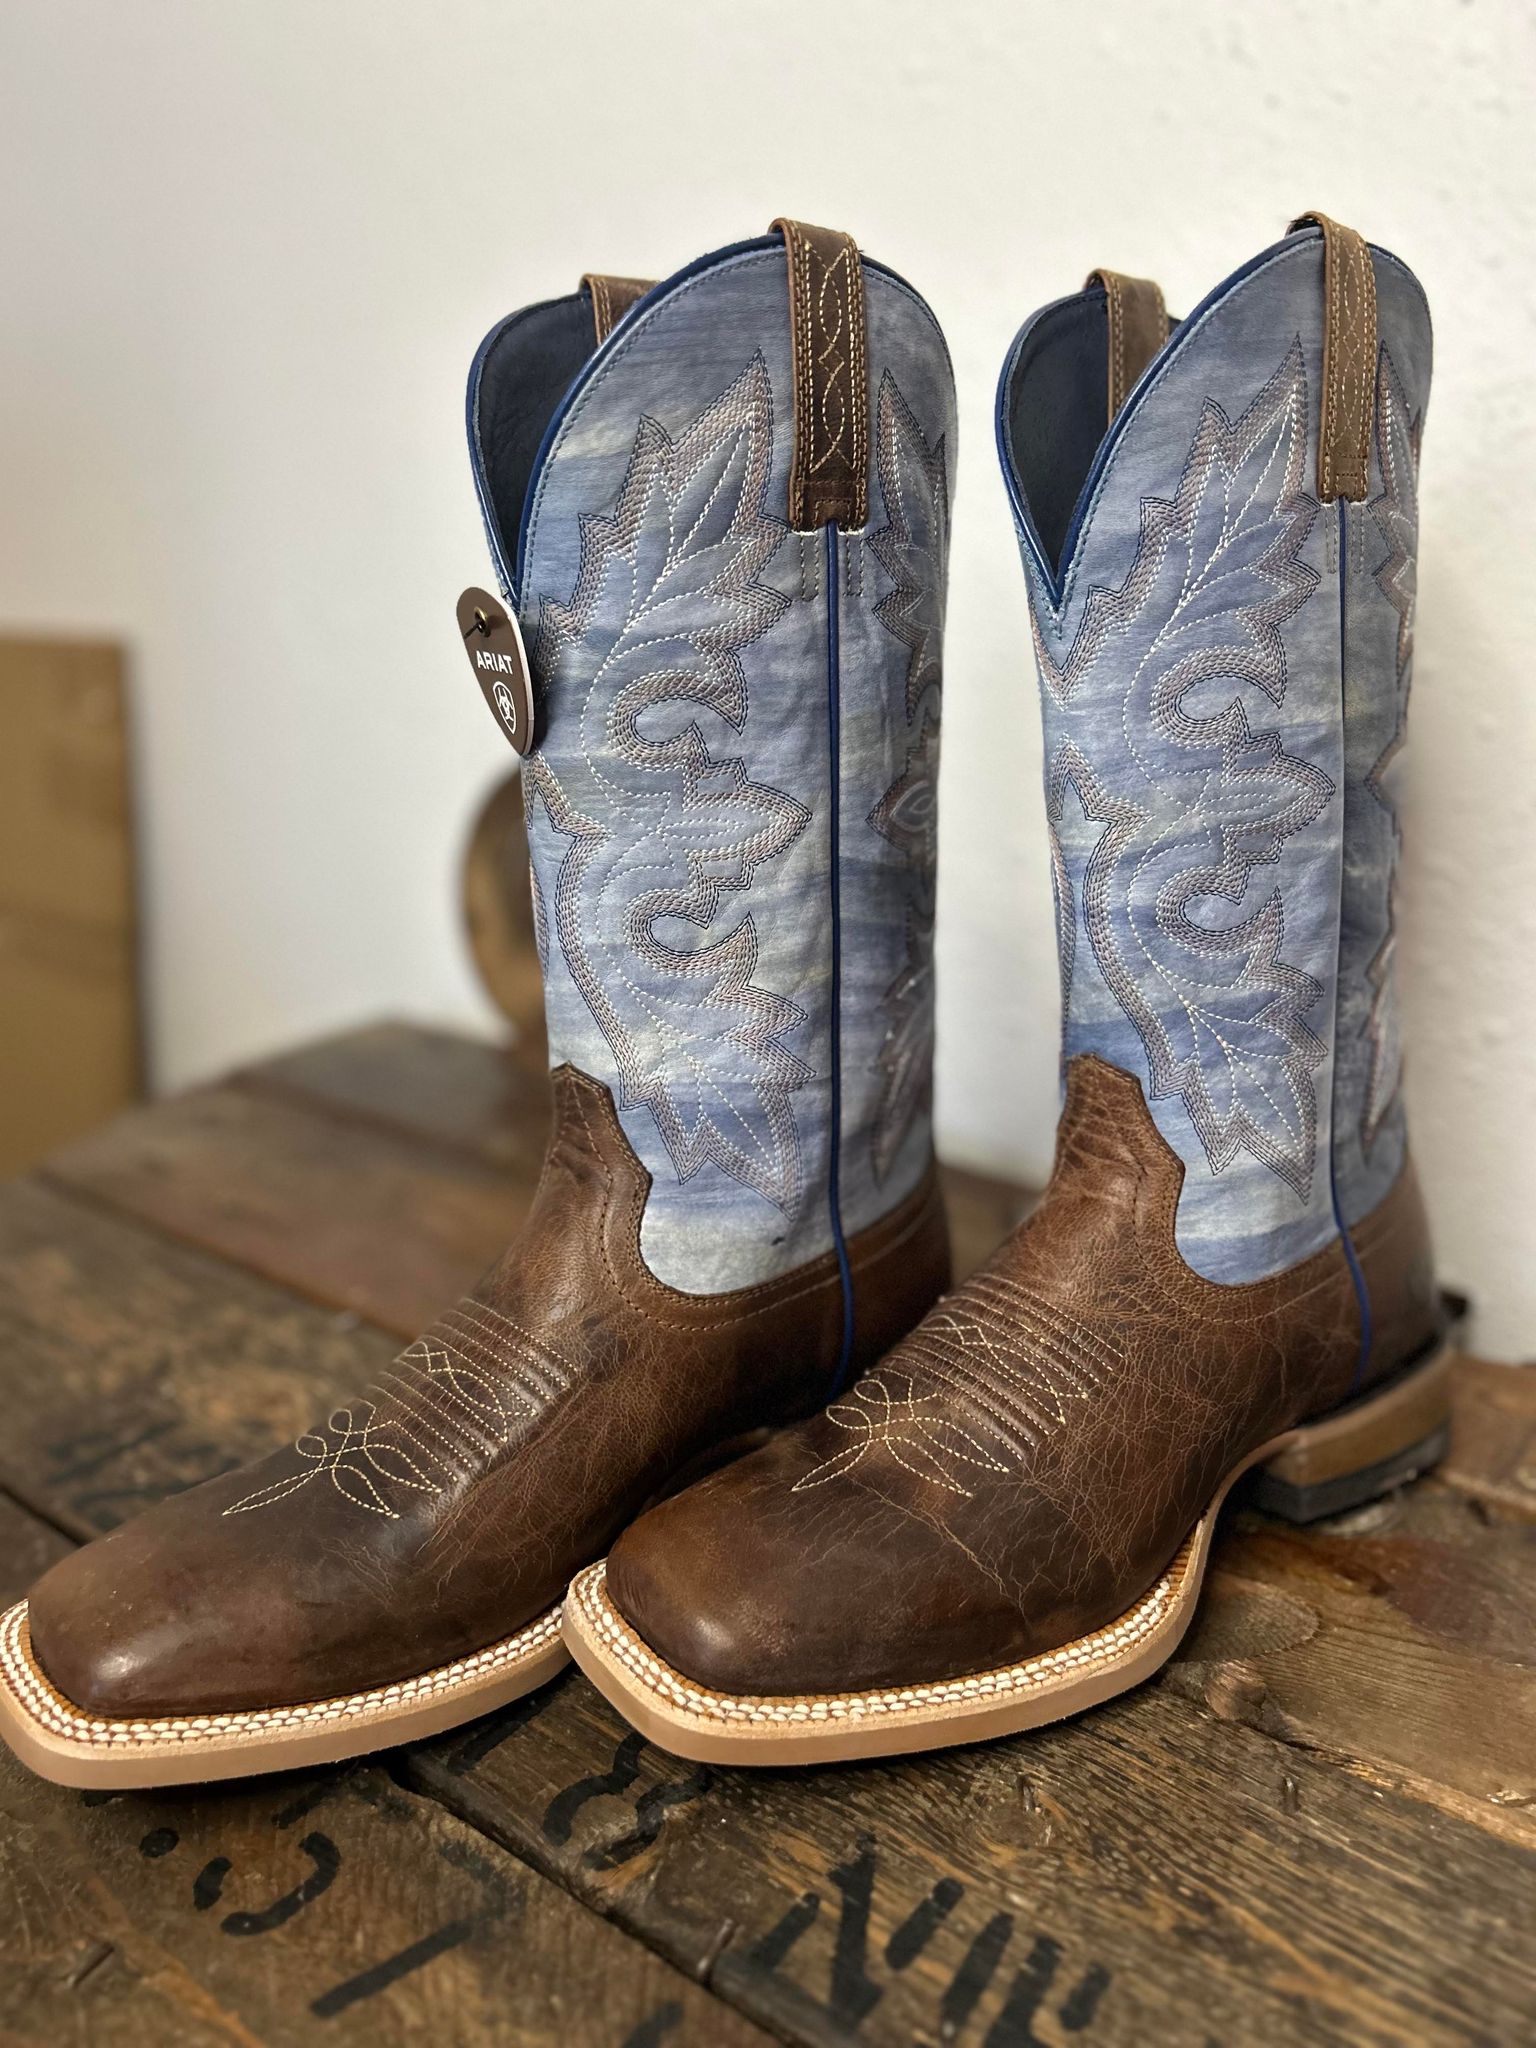 Men's Ariat Standout Cowboy Boot-Men's Boots-Ariat-Lucky J Boots & More, Women's, Men's, & Kids Western Store Located in Carthage, MO